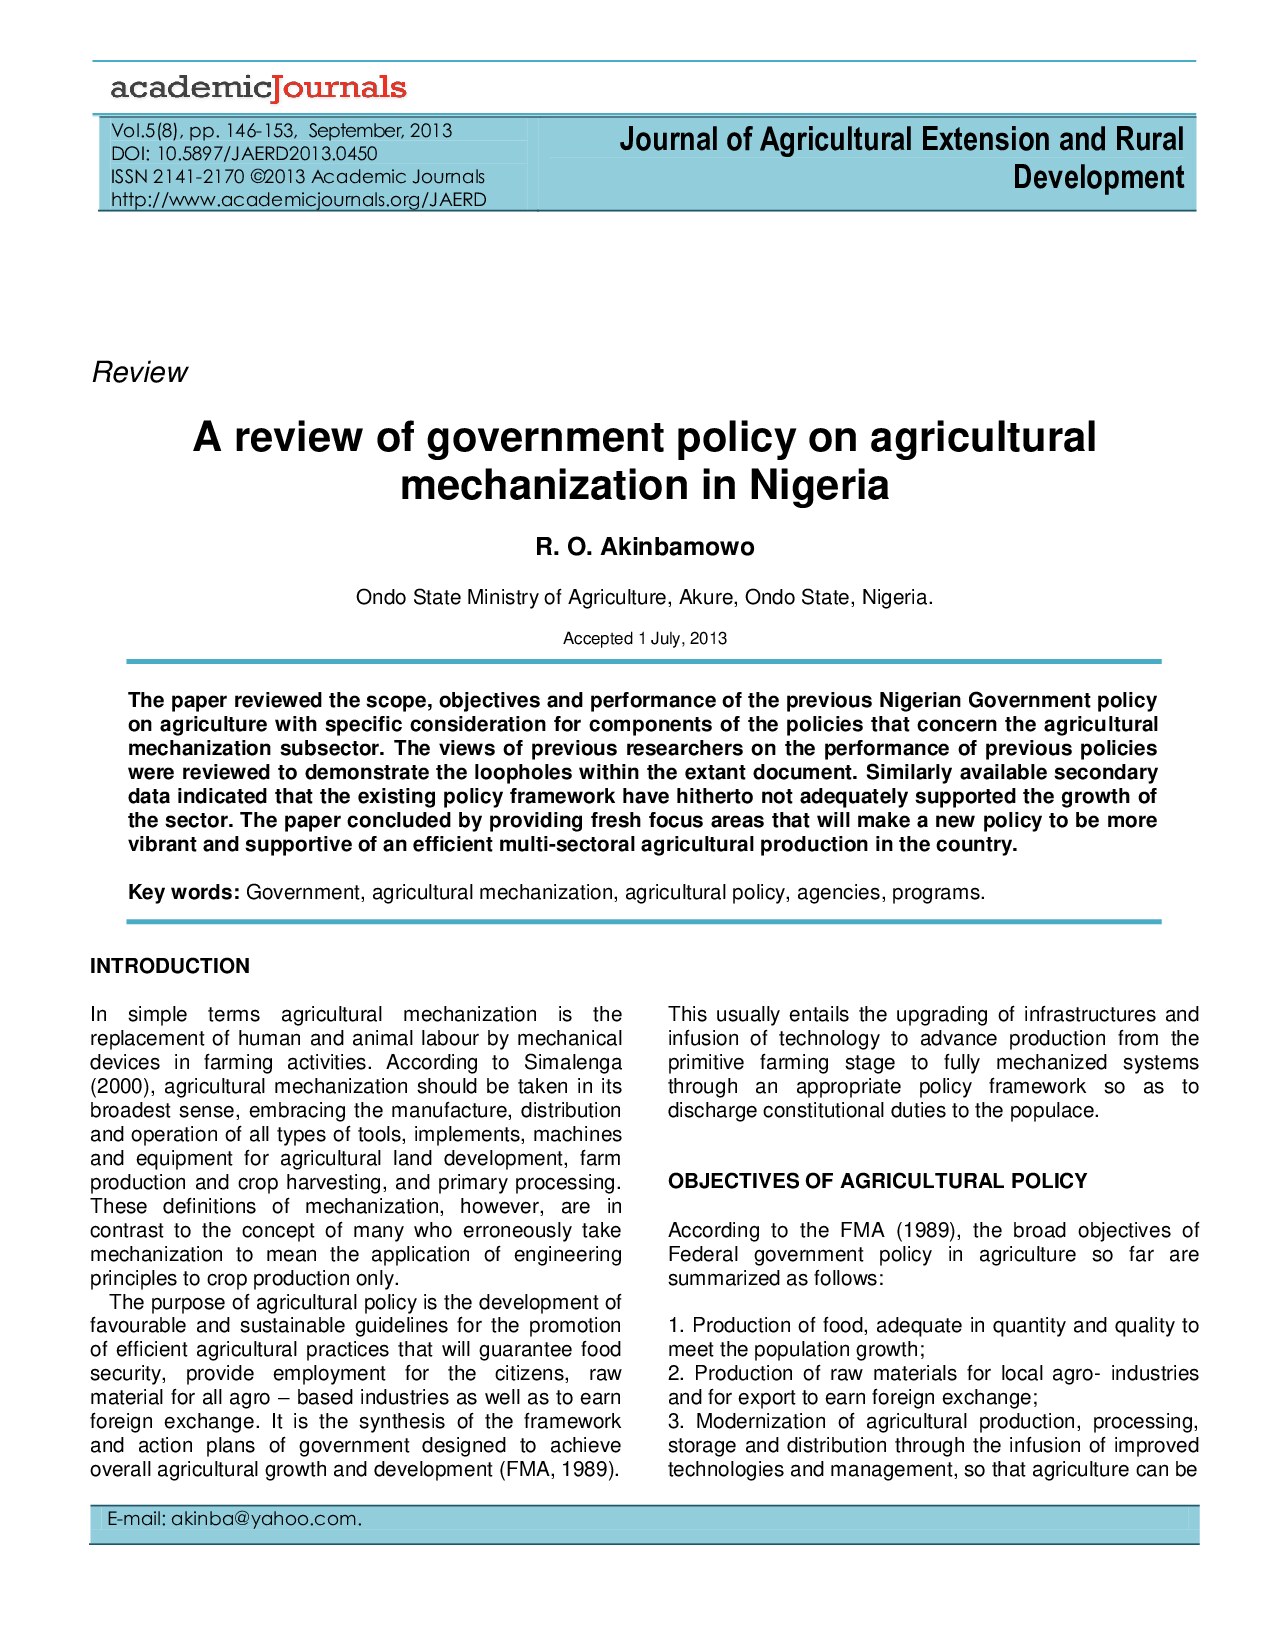 A REVIEW OF GOVERNMENT POLICY ON AGRICULTURAL MECHANIZATION IN NIGERIA  R. O. AKINBAMOWO